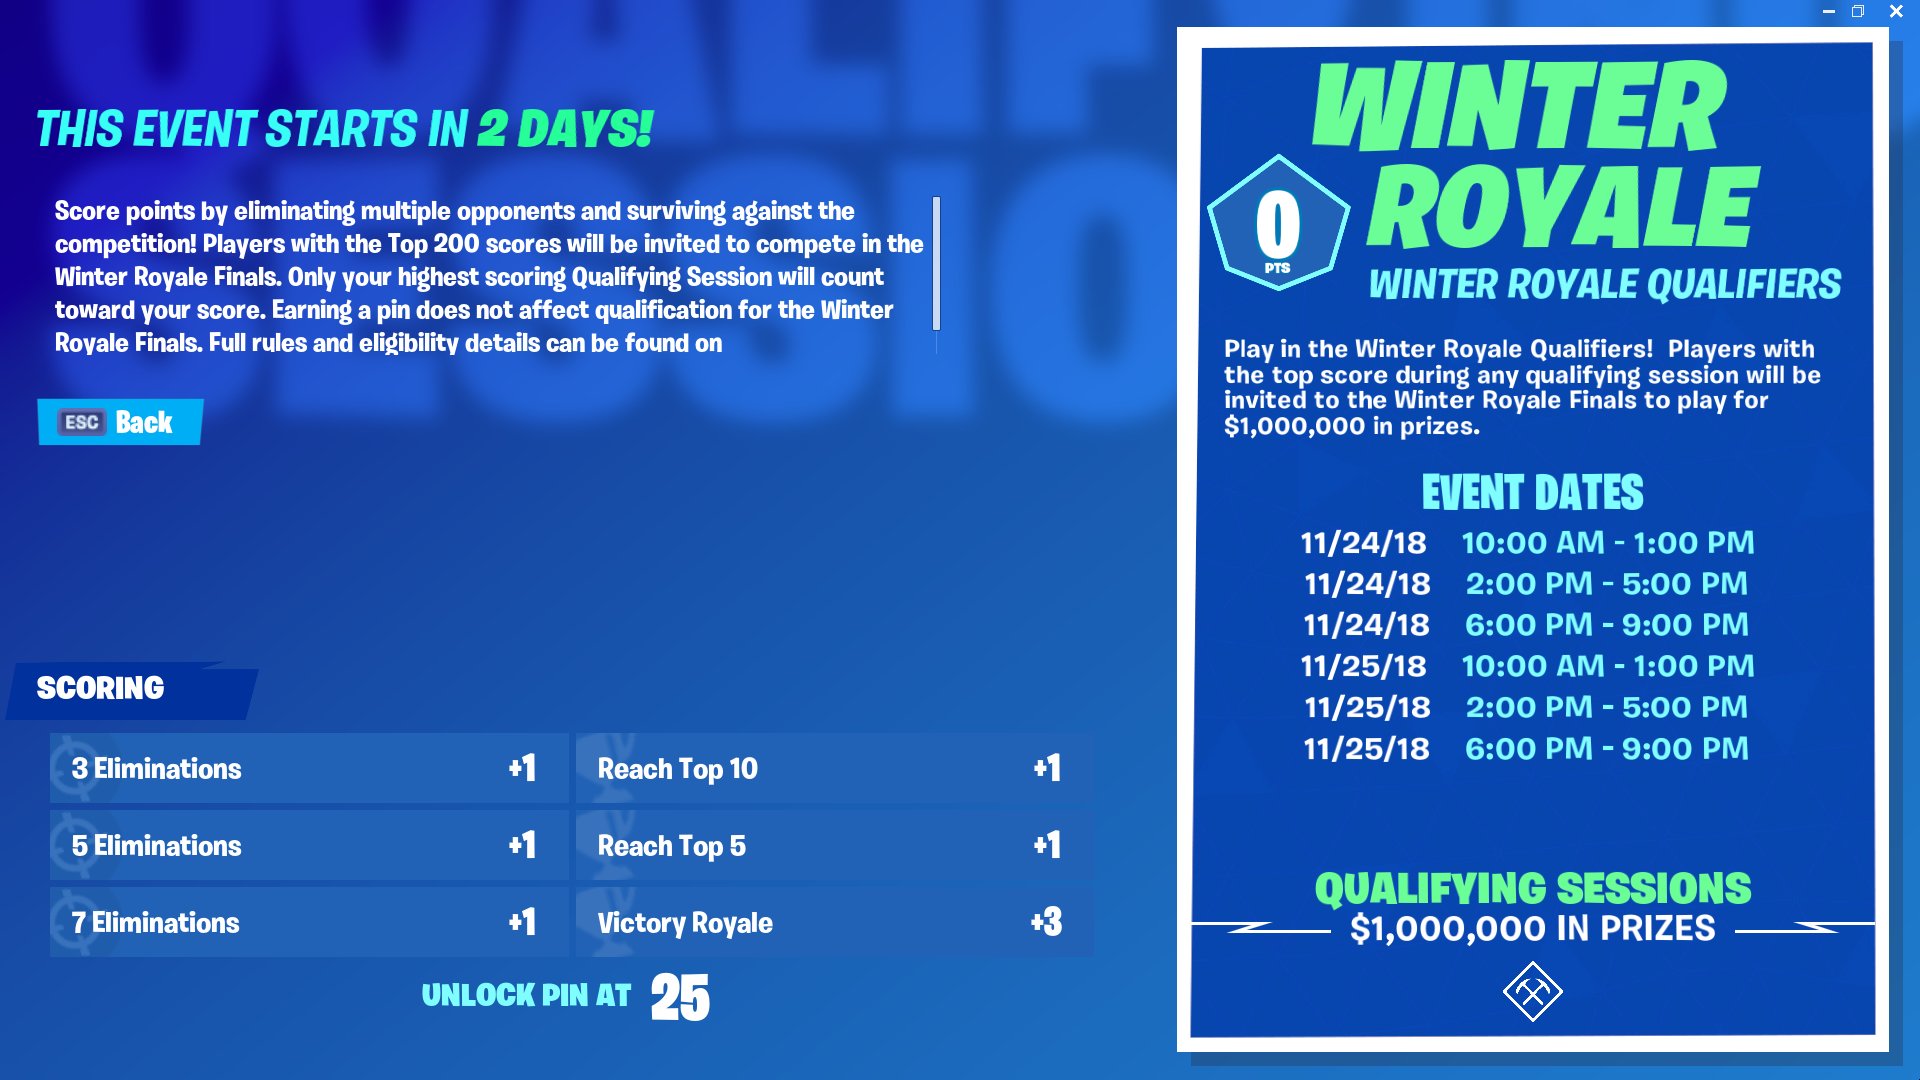 Derbeville test soup Reserve Fortnite News | FortniteMaster.com on Twitter: "In case you haven't yet  seen it - here is the scoring system for the upcoming Winter Royale  qualifiers this weekend! https://t.co/Dui5hivnax" / Twitter